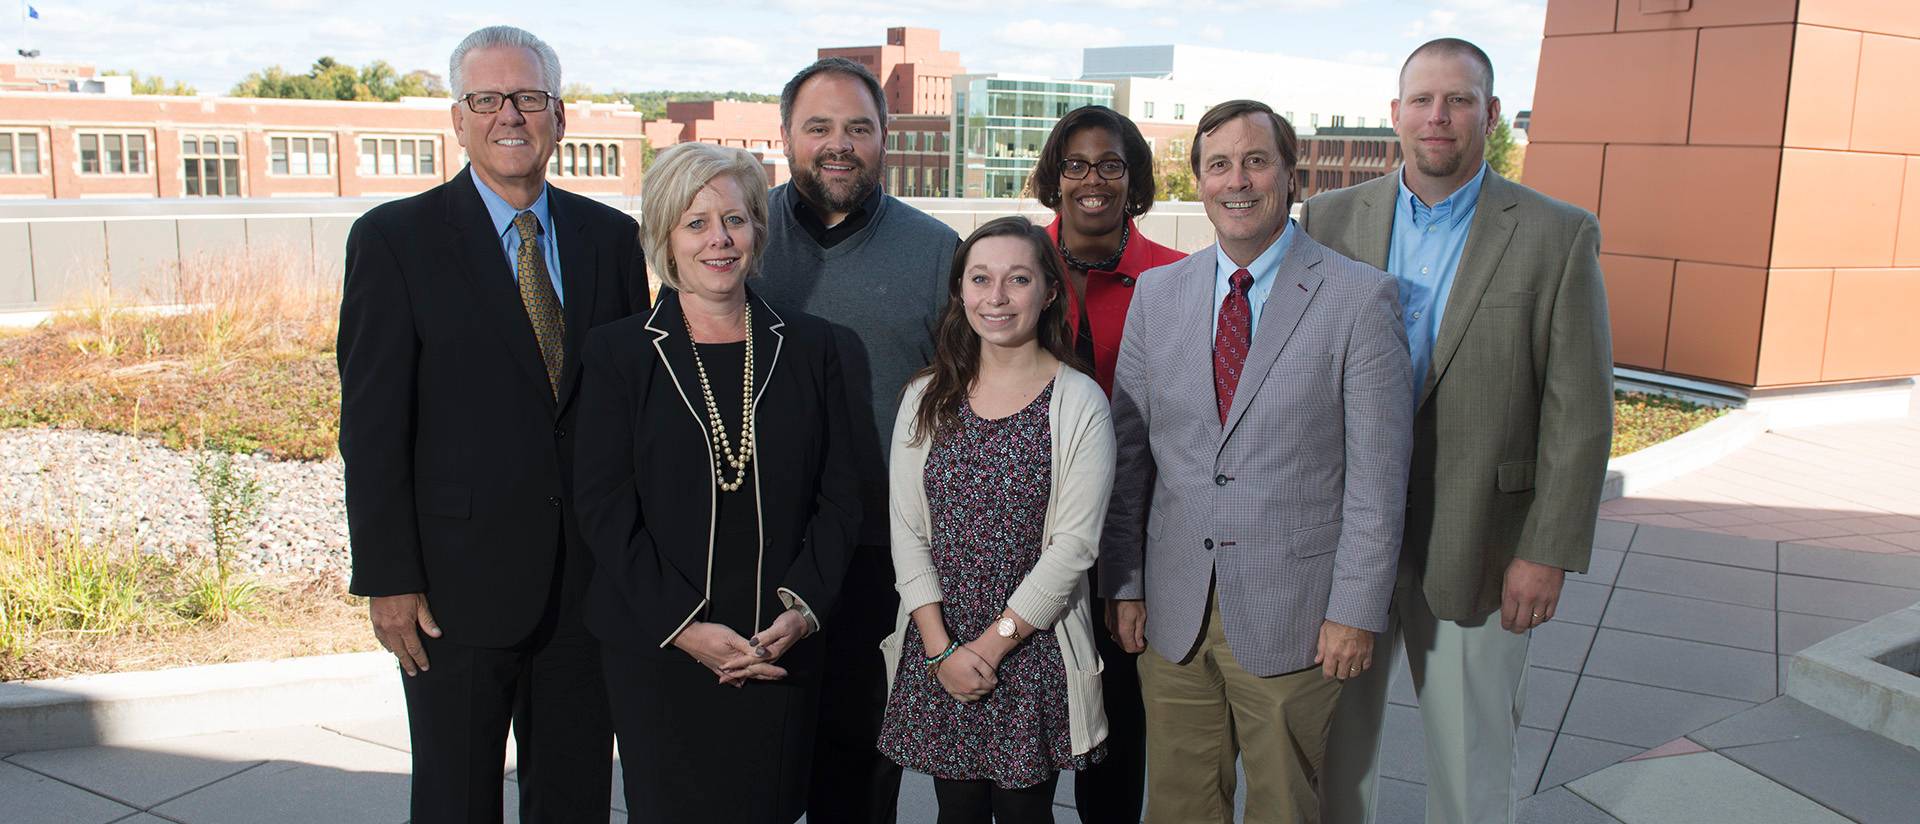 New members on the UW-Eau Claire Foundation board include (from left) Keith Donnermeyer, Christine Smith, Michael Strubel, Mariah Wild (student representative), Angela Pittman Taylor, Harry Kaiser and Jason Wudi.